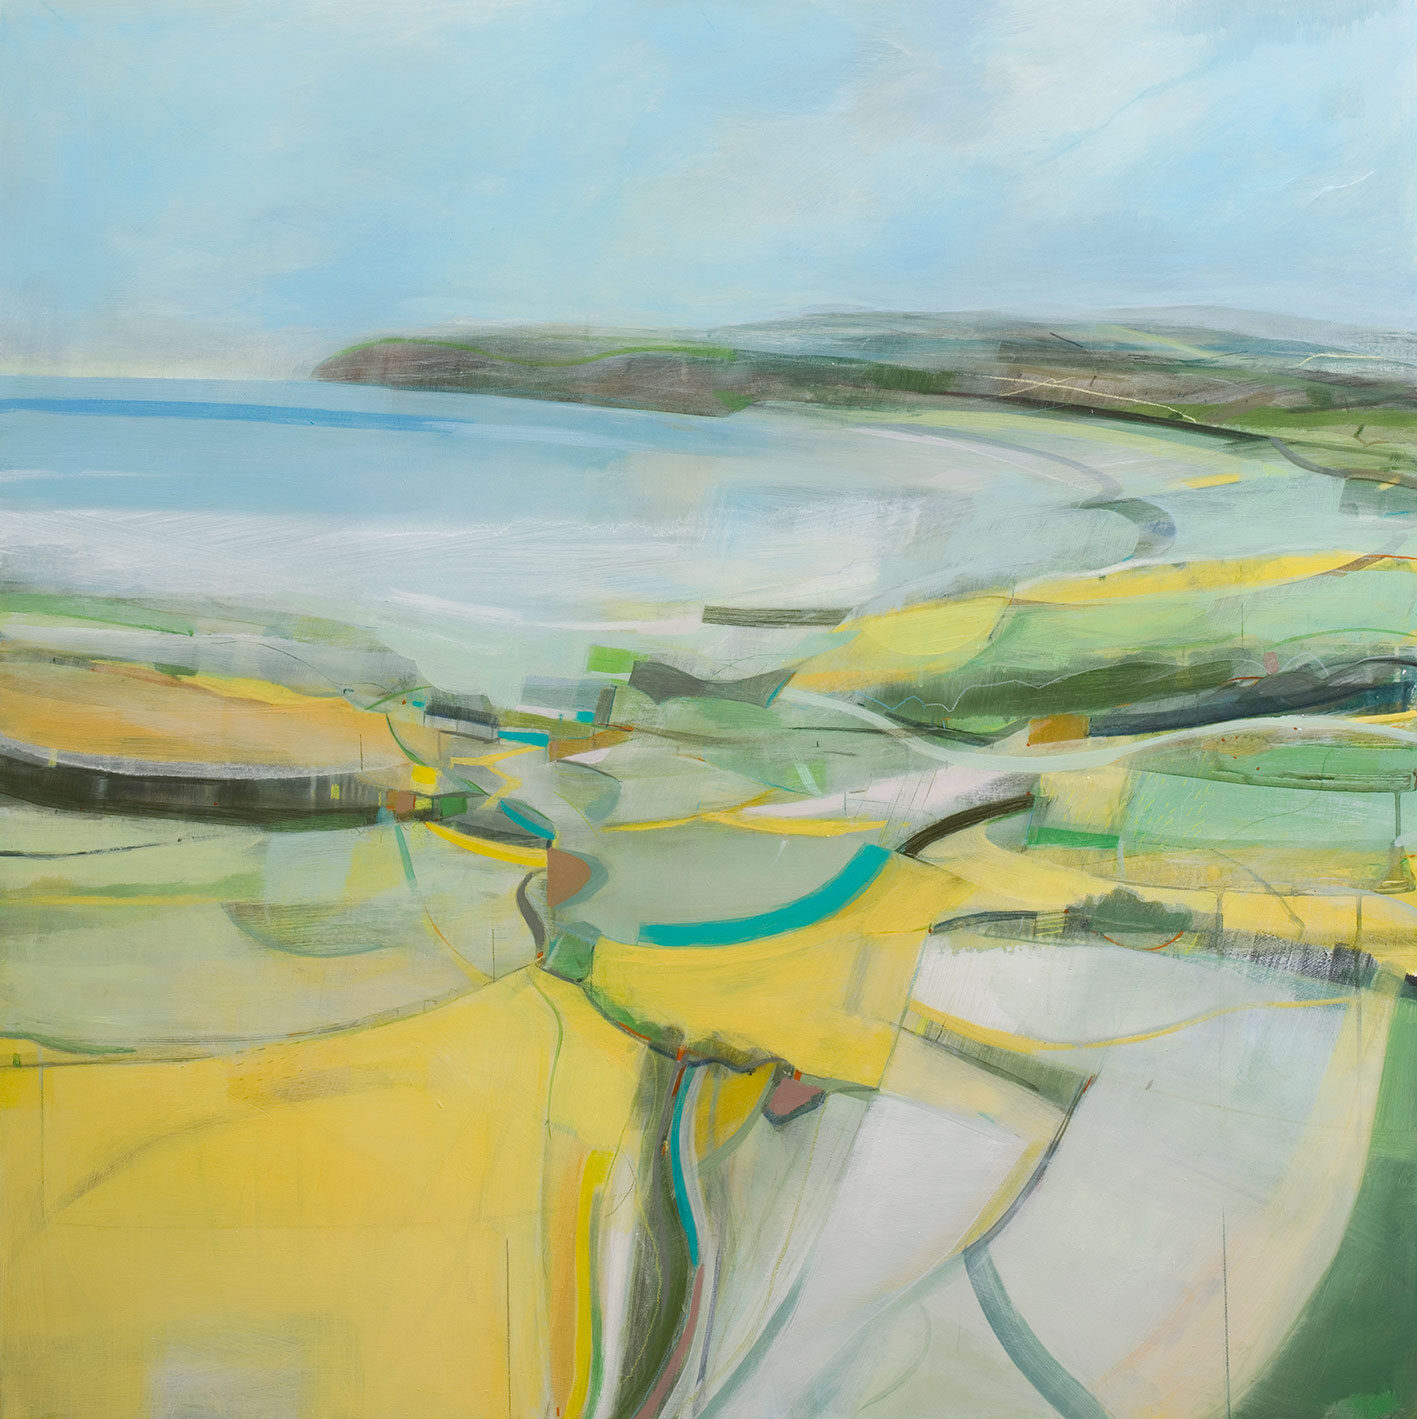 resplendant landscape painting in uplifting yellows and greens and a Cornish sea by renowned artist Fiona Millais | Cornwall Contemporary